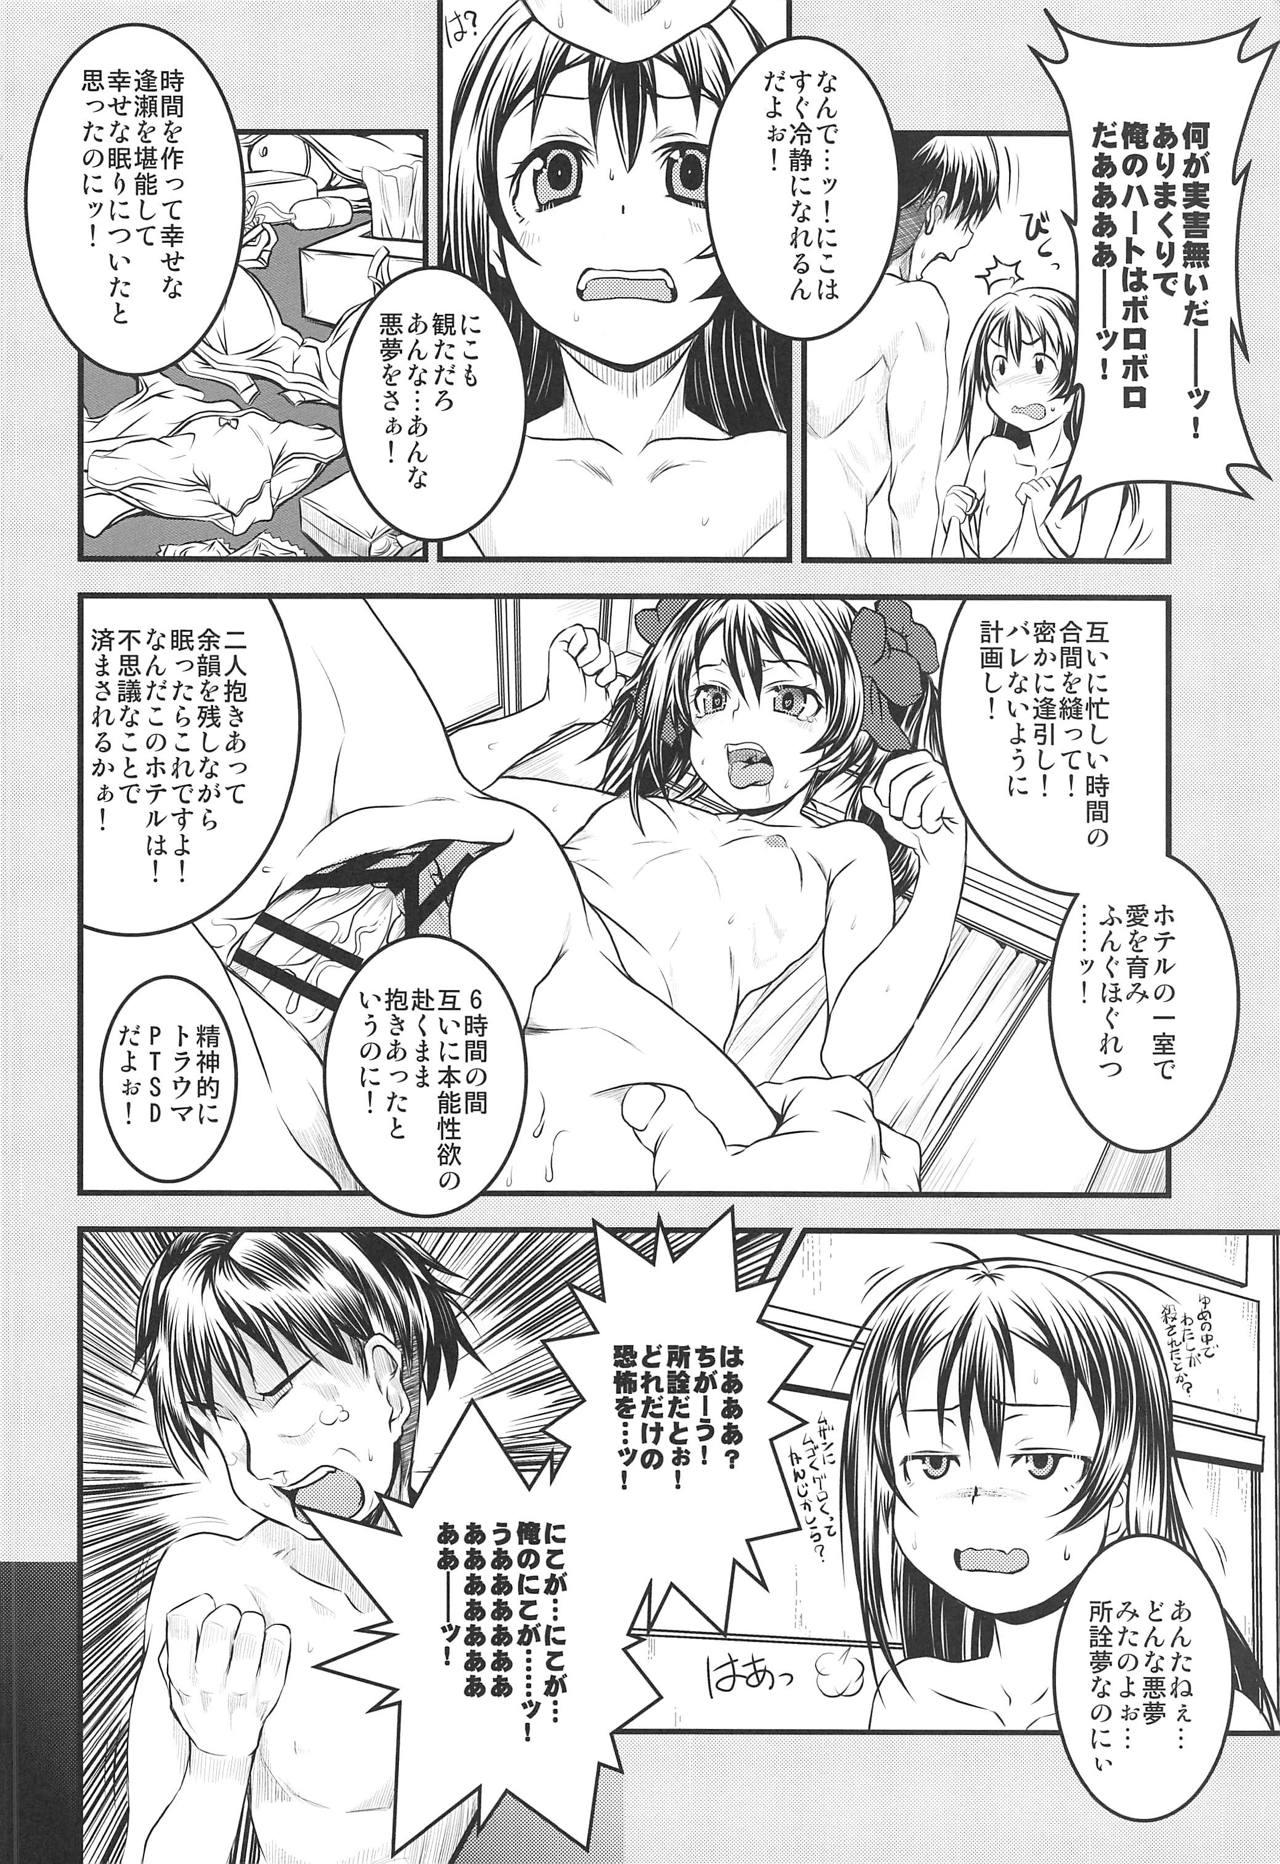 Girls Getting Fucked Love Niko Live!! - Love live Gay Deepthroat - Page 5